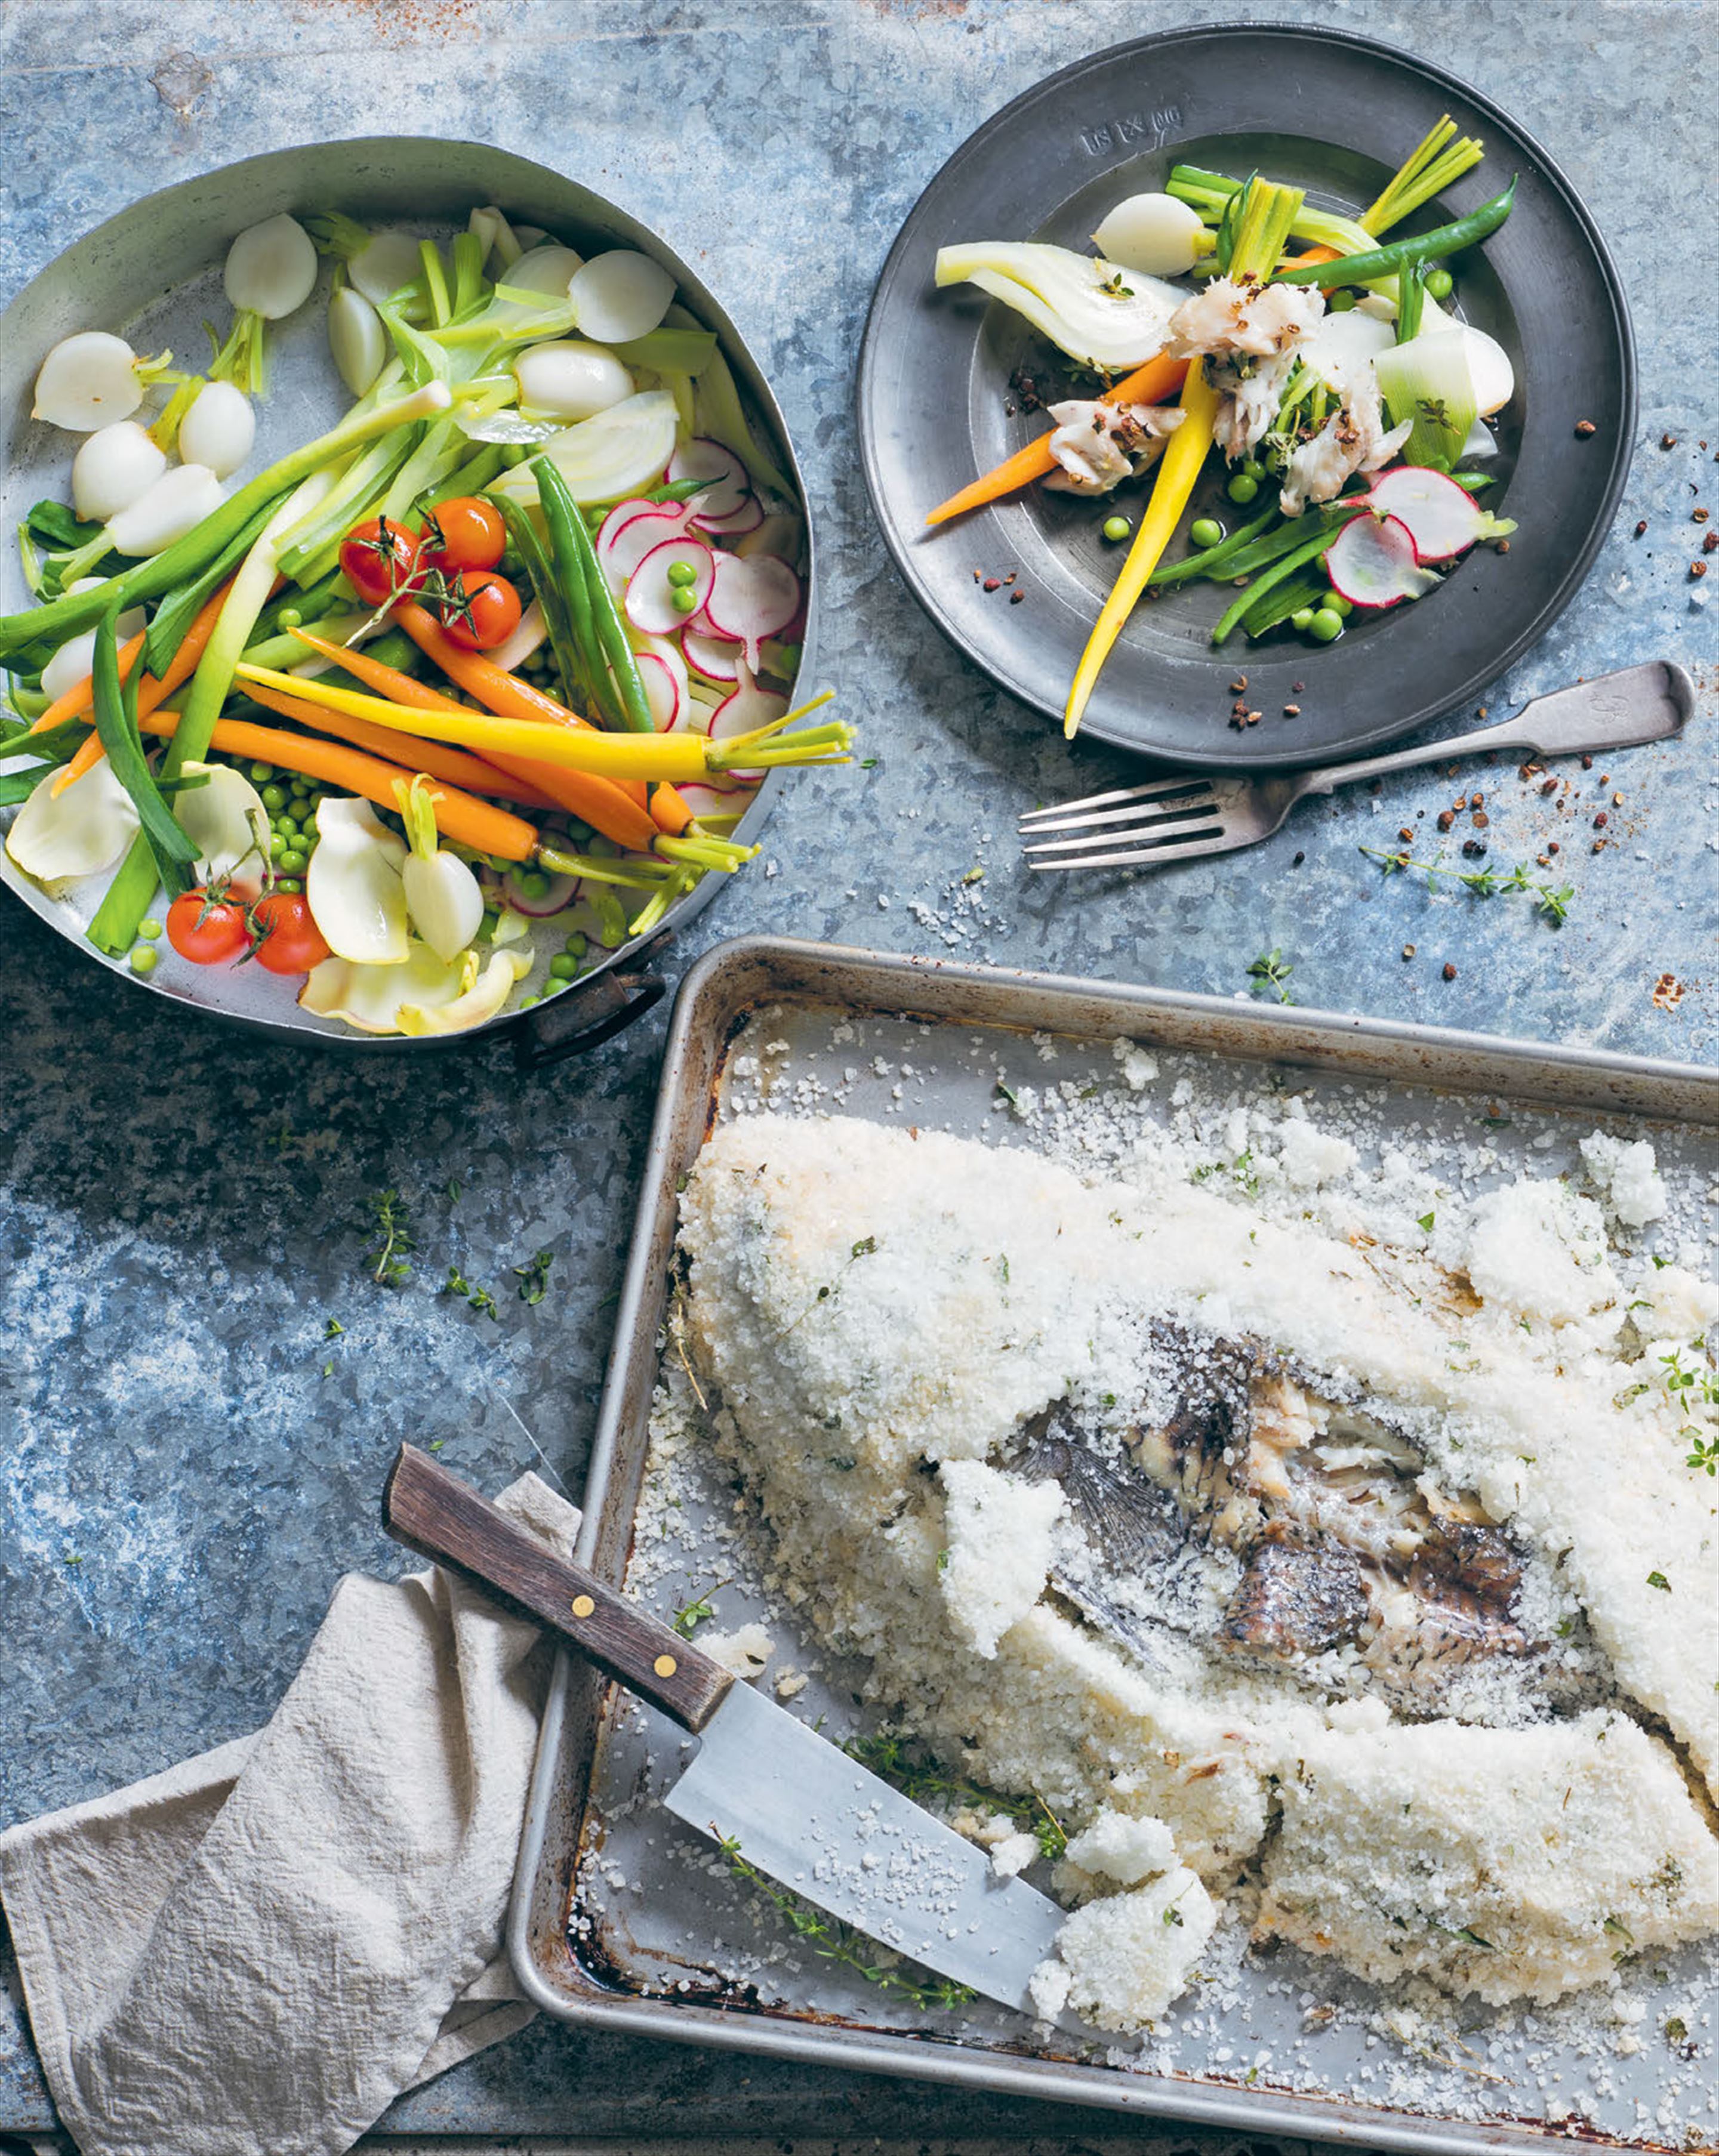 Salt-crusted fish with spring vegetables